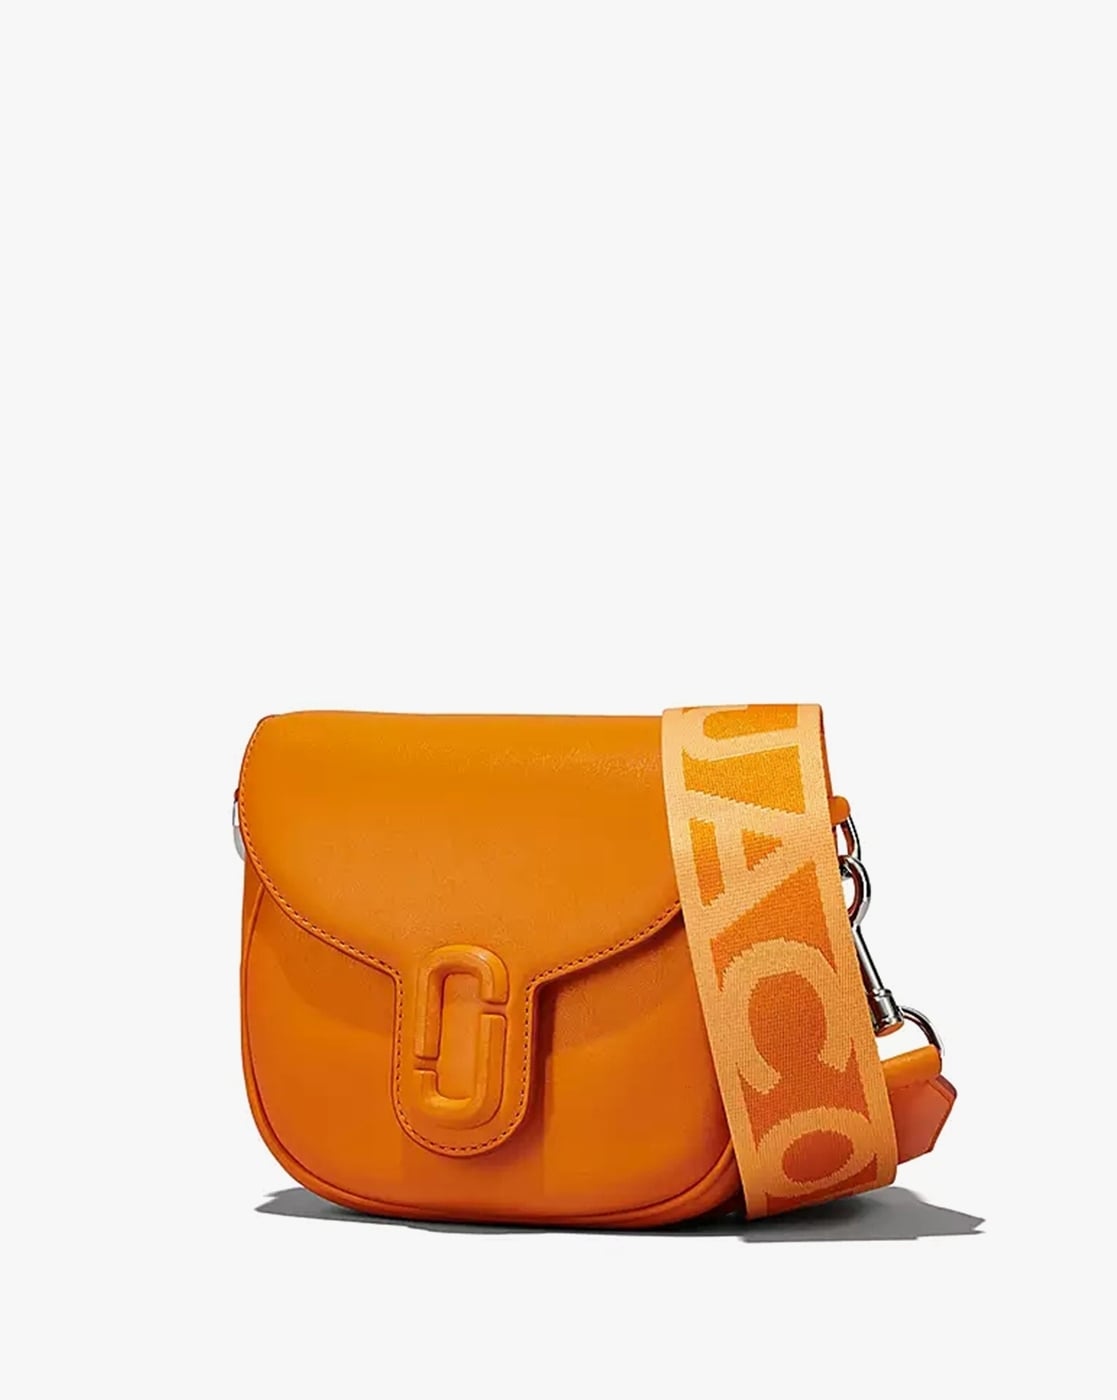 Marc Jacobs Yellow 'The Mesh Tote Bag' Tote Marc Jacobs